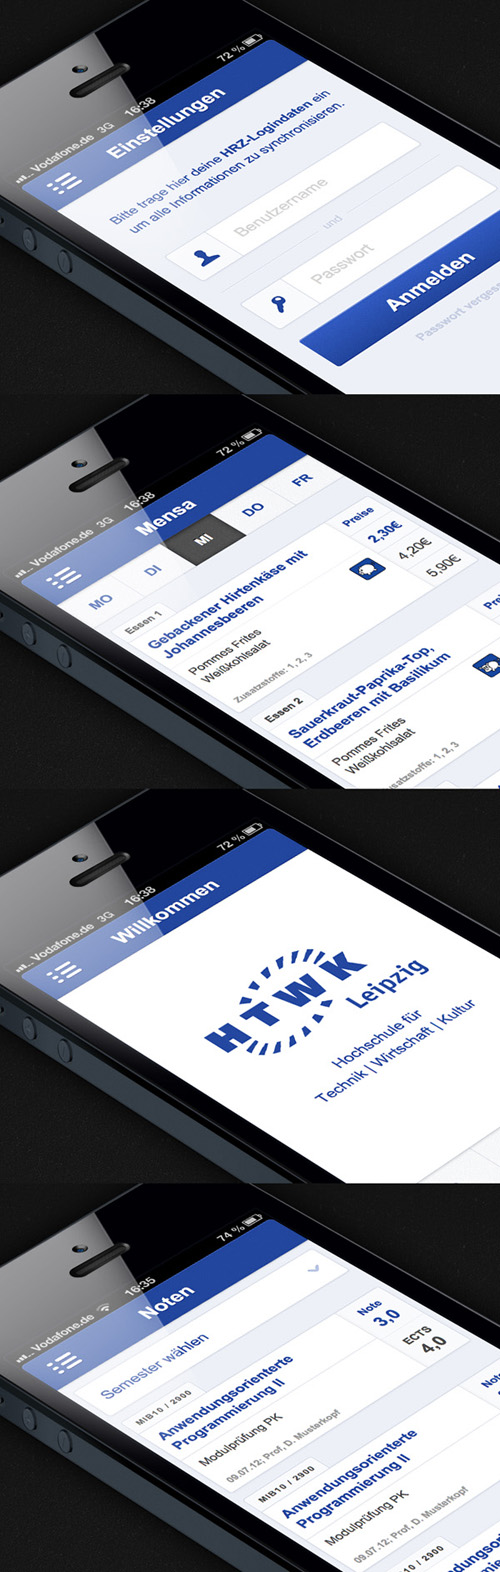 Mobile UI Design and User Experience-46